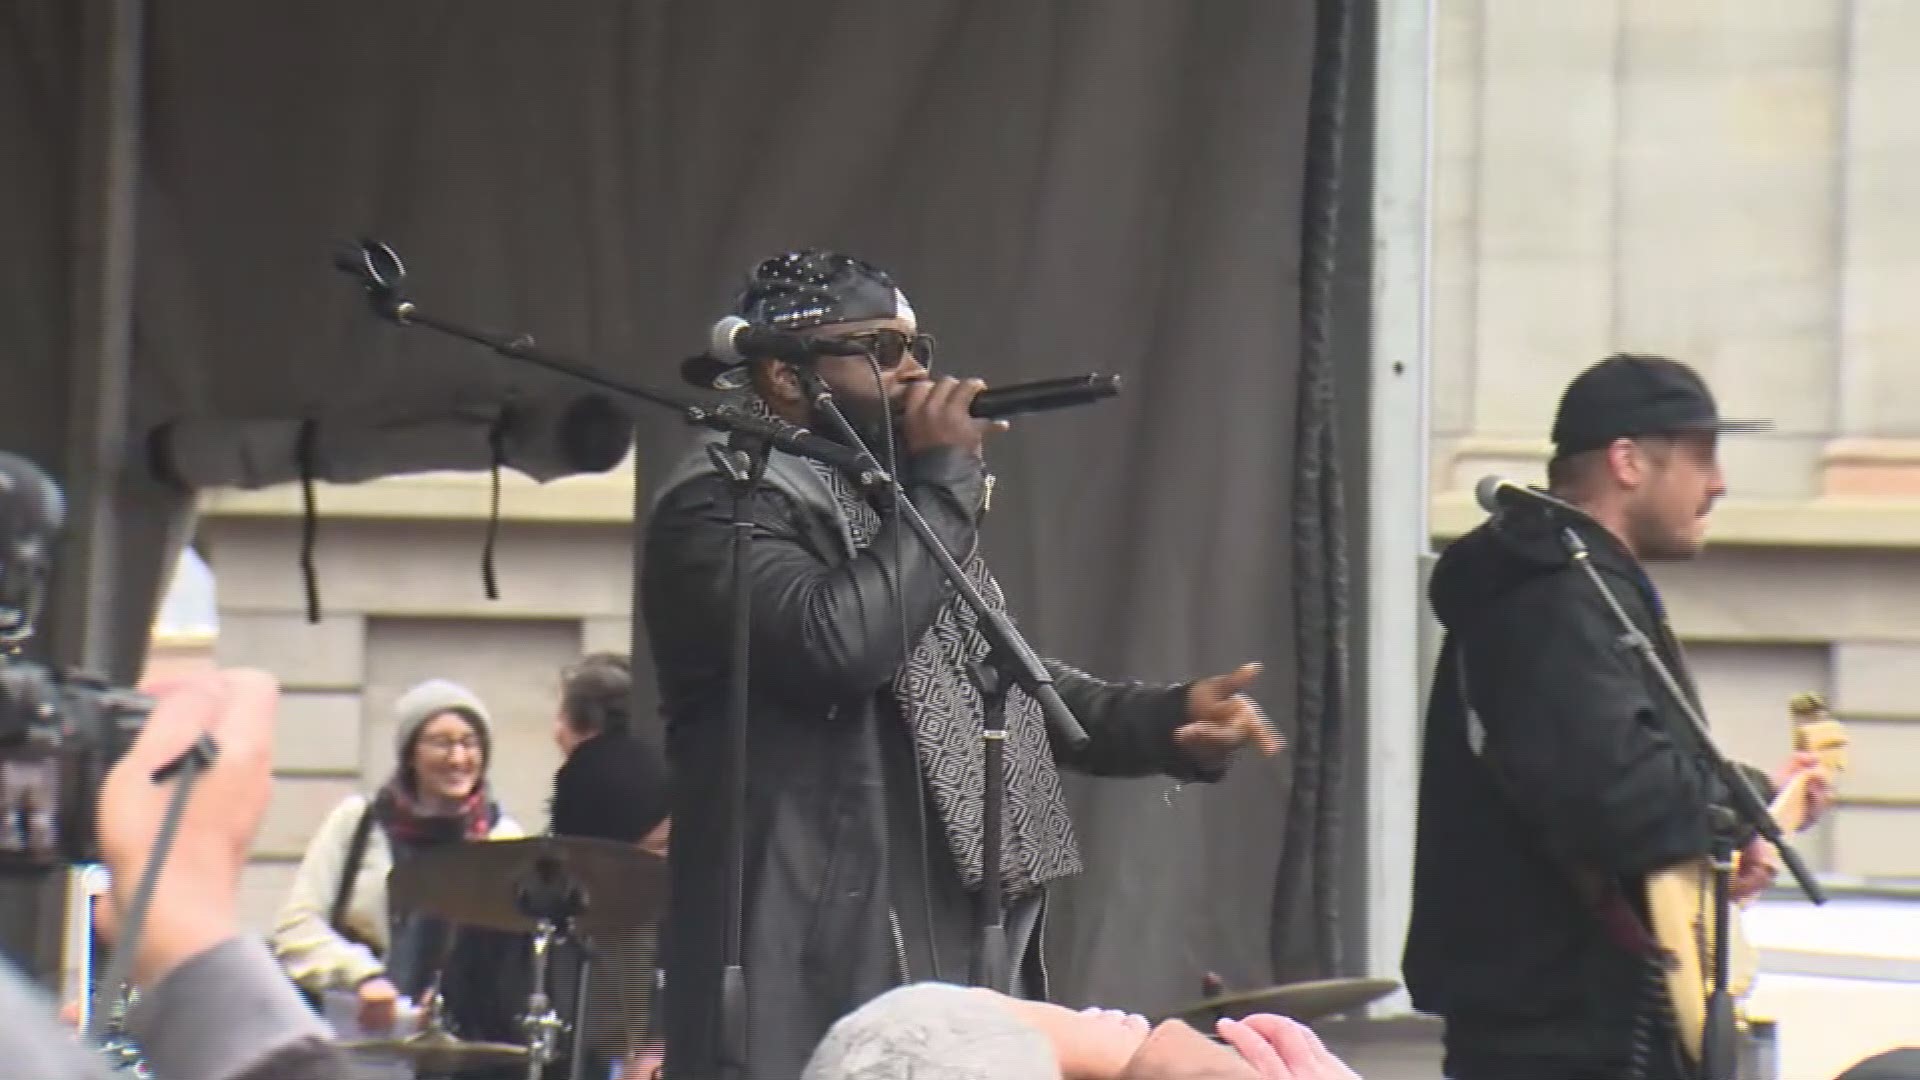 Black Thought from The Roots joins Portgual. The Man at March for Our Lives show in Portland.